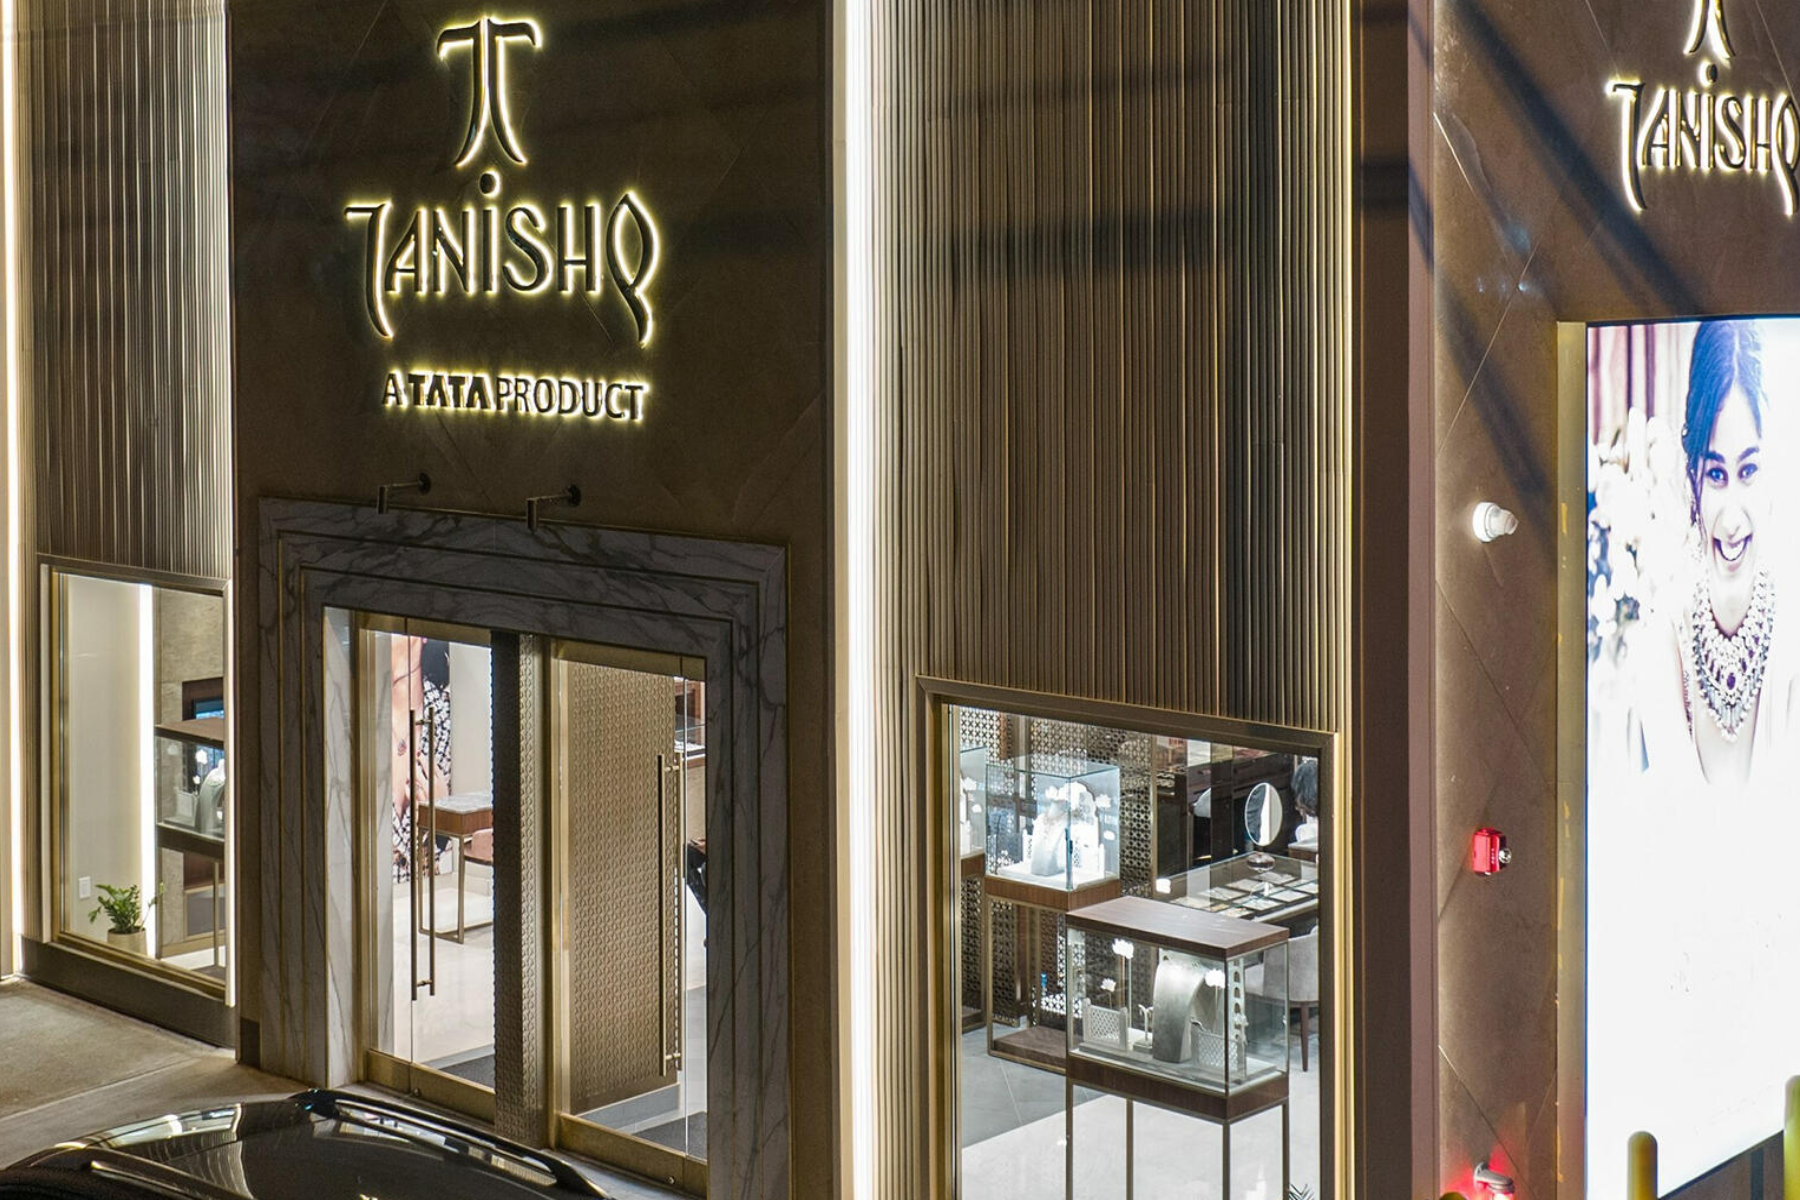 Indian Jewelry Brand Tanishq Opens Its First U.S. Store, More On The Way